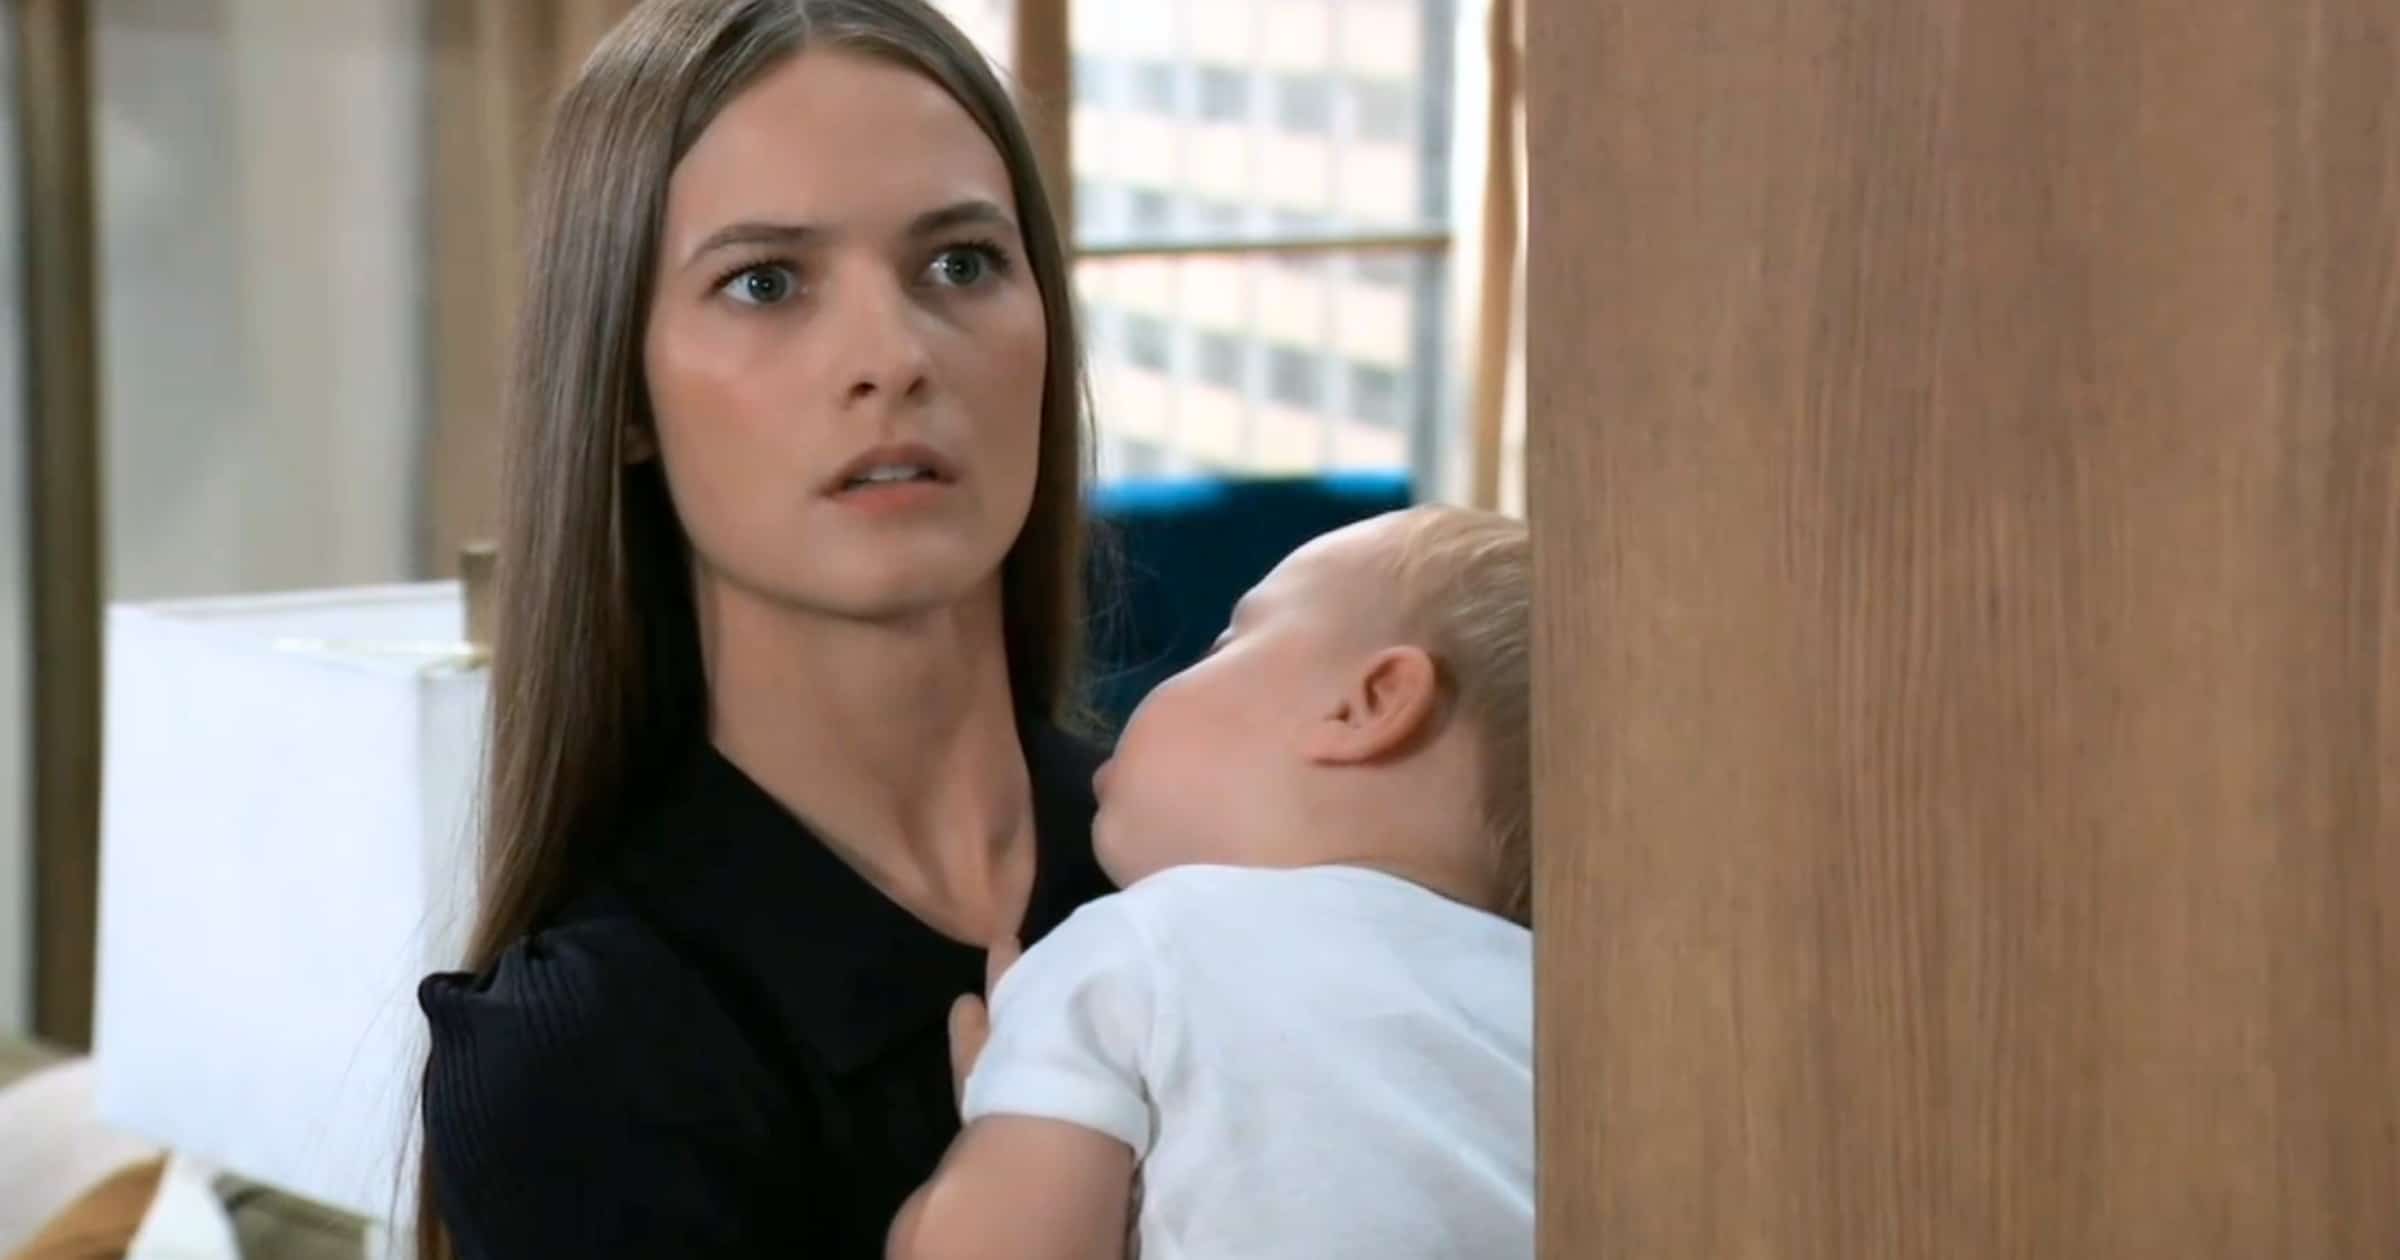 General Hospital - Oct 31 - Esme and Ace